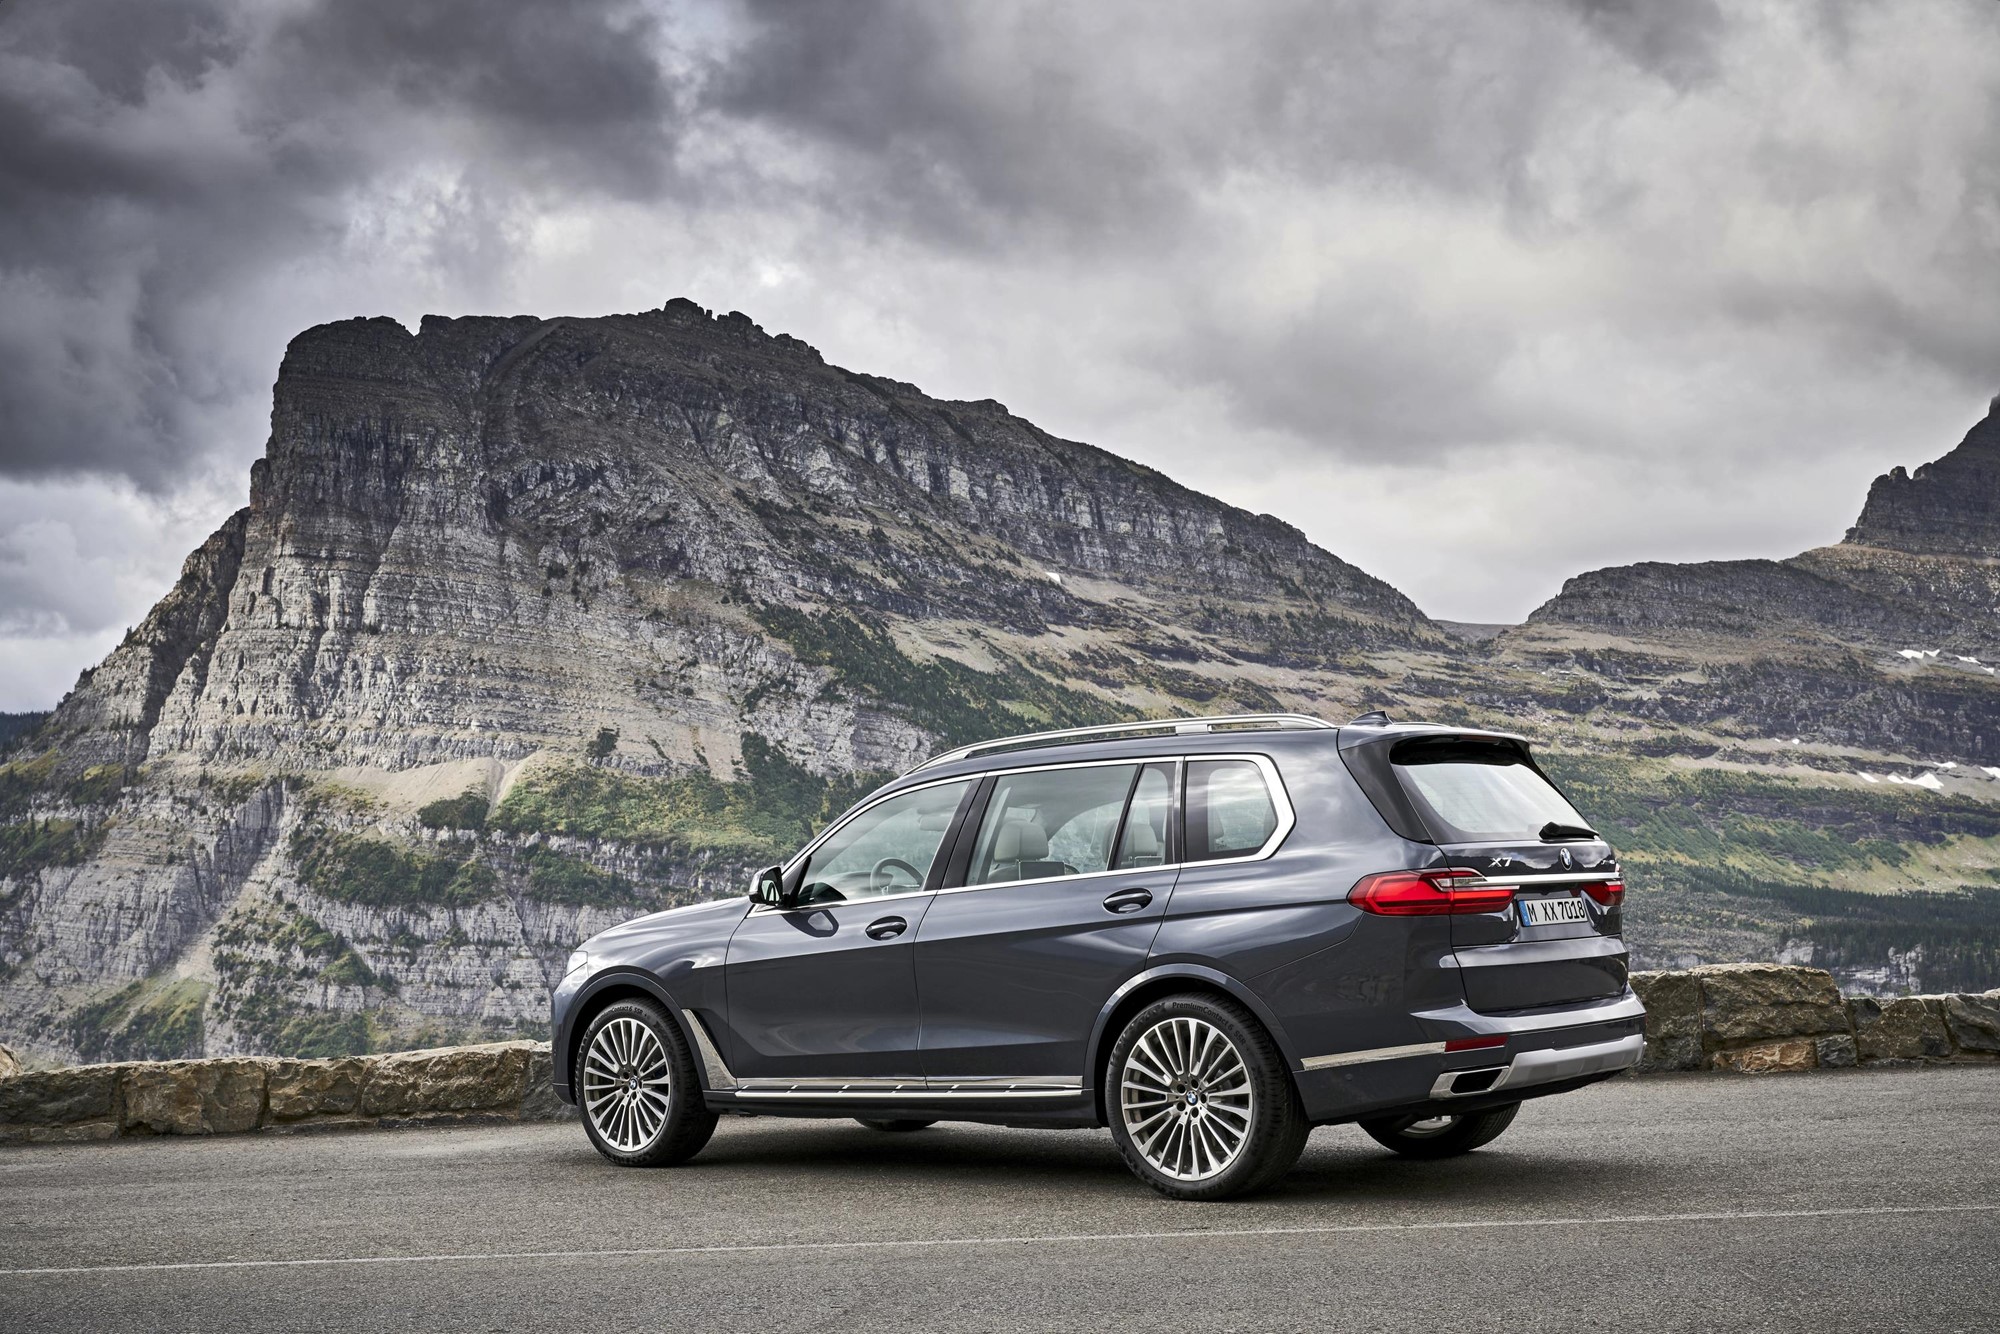 New BMW X7 flagship SUV priced from £72,155 | Car Model News